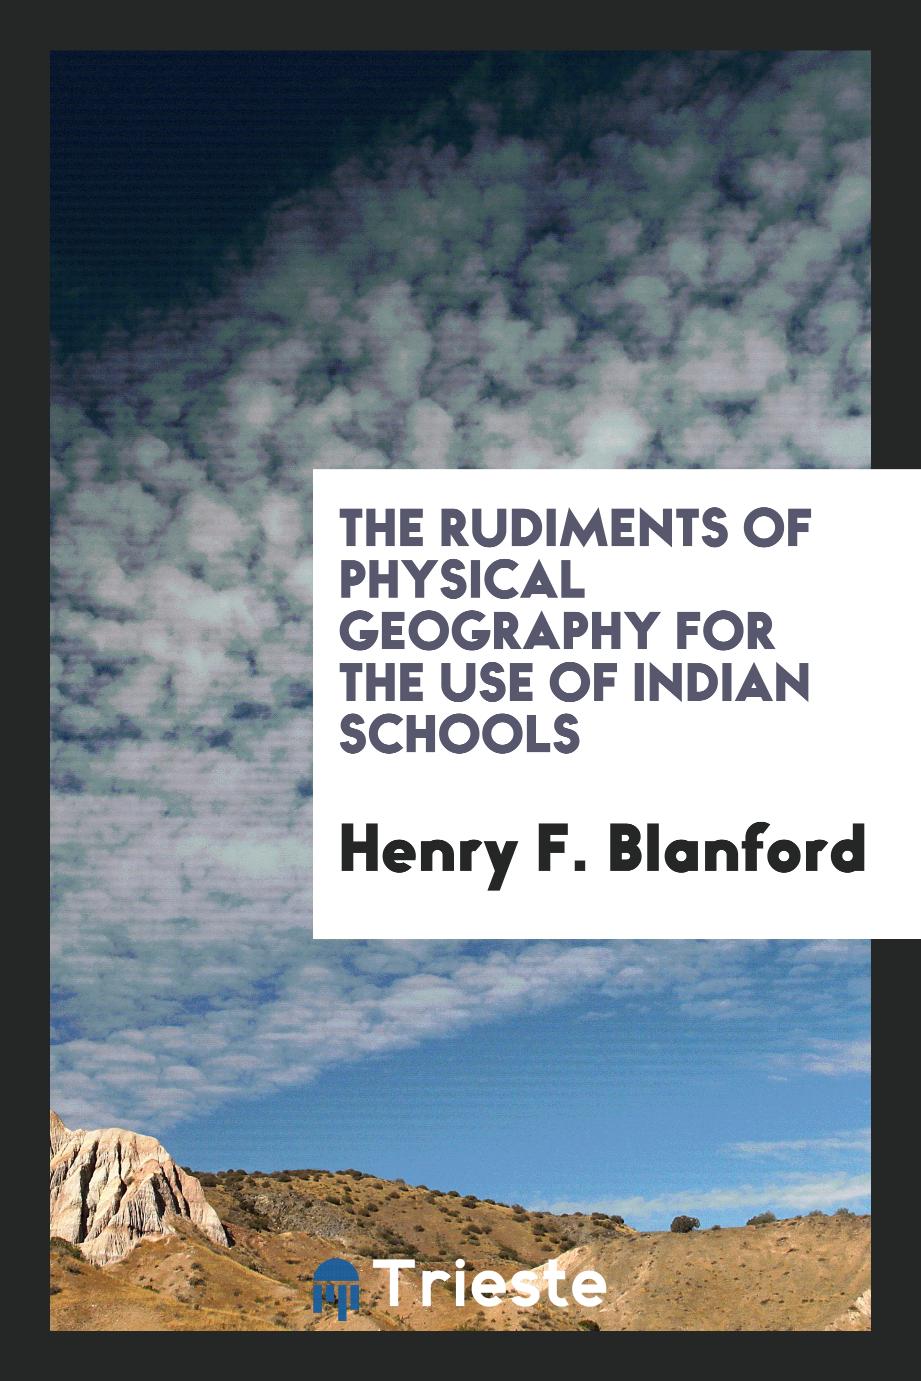 The Rudiments of Physical Geography for the Use of Indian Schools